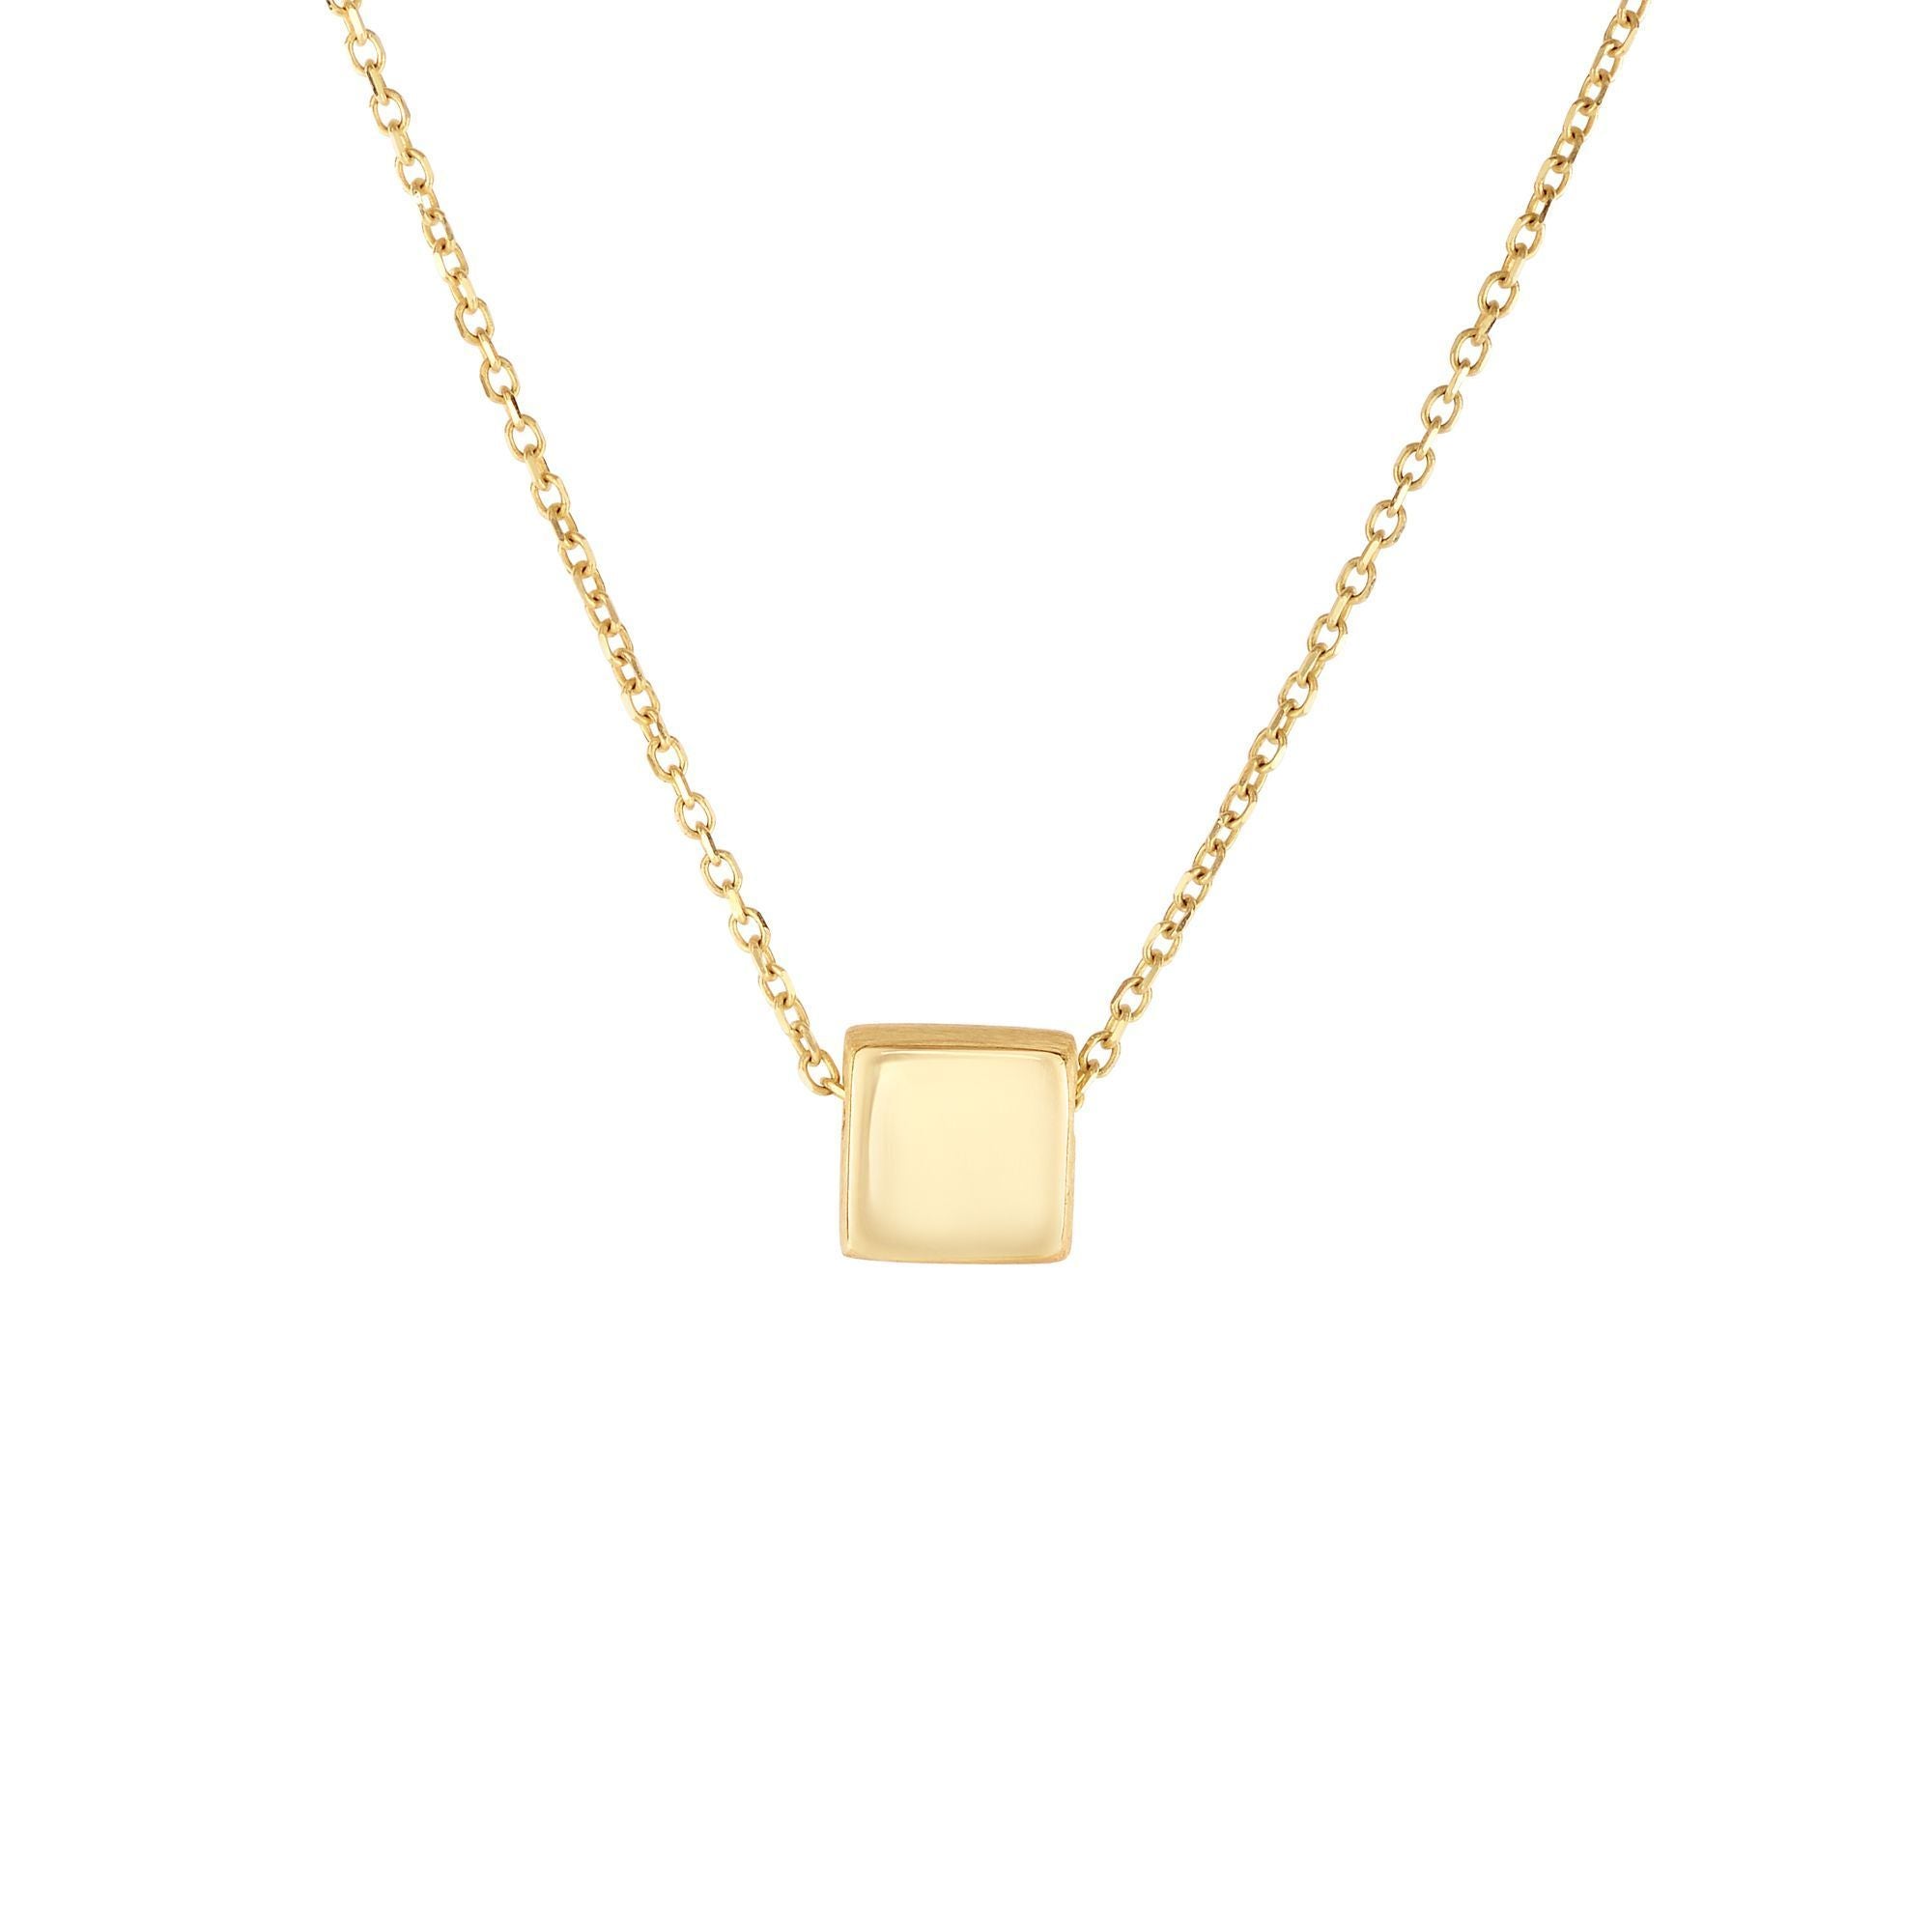 Minimalist Solid Gold Satin Square Shape Necklace - wingroupjewelry